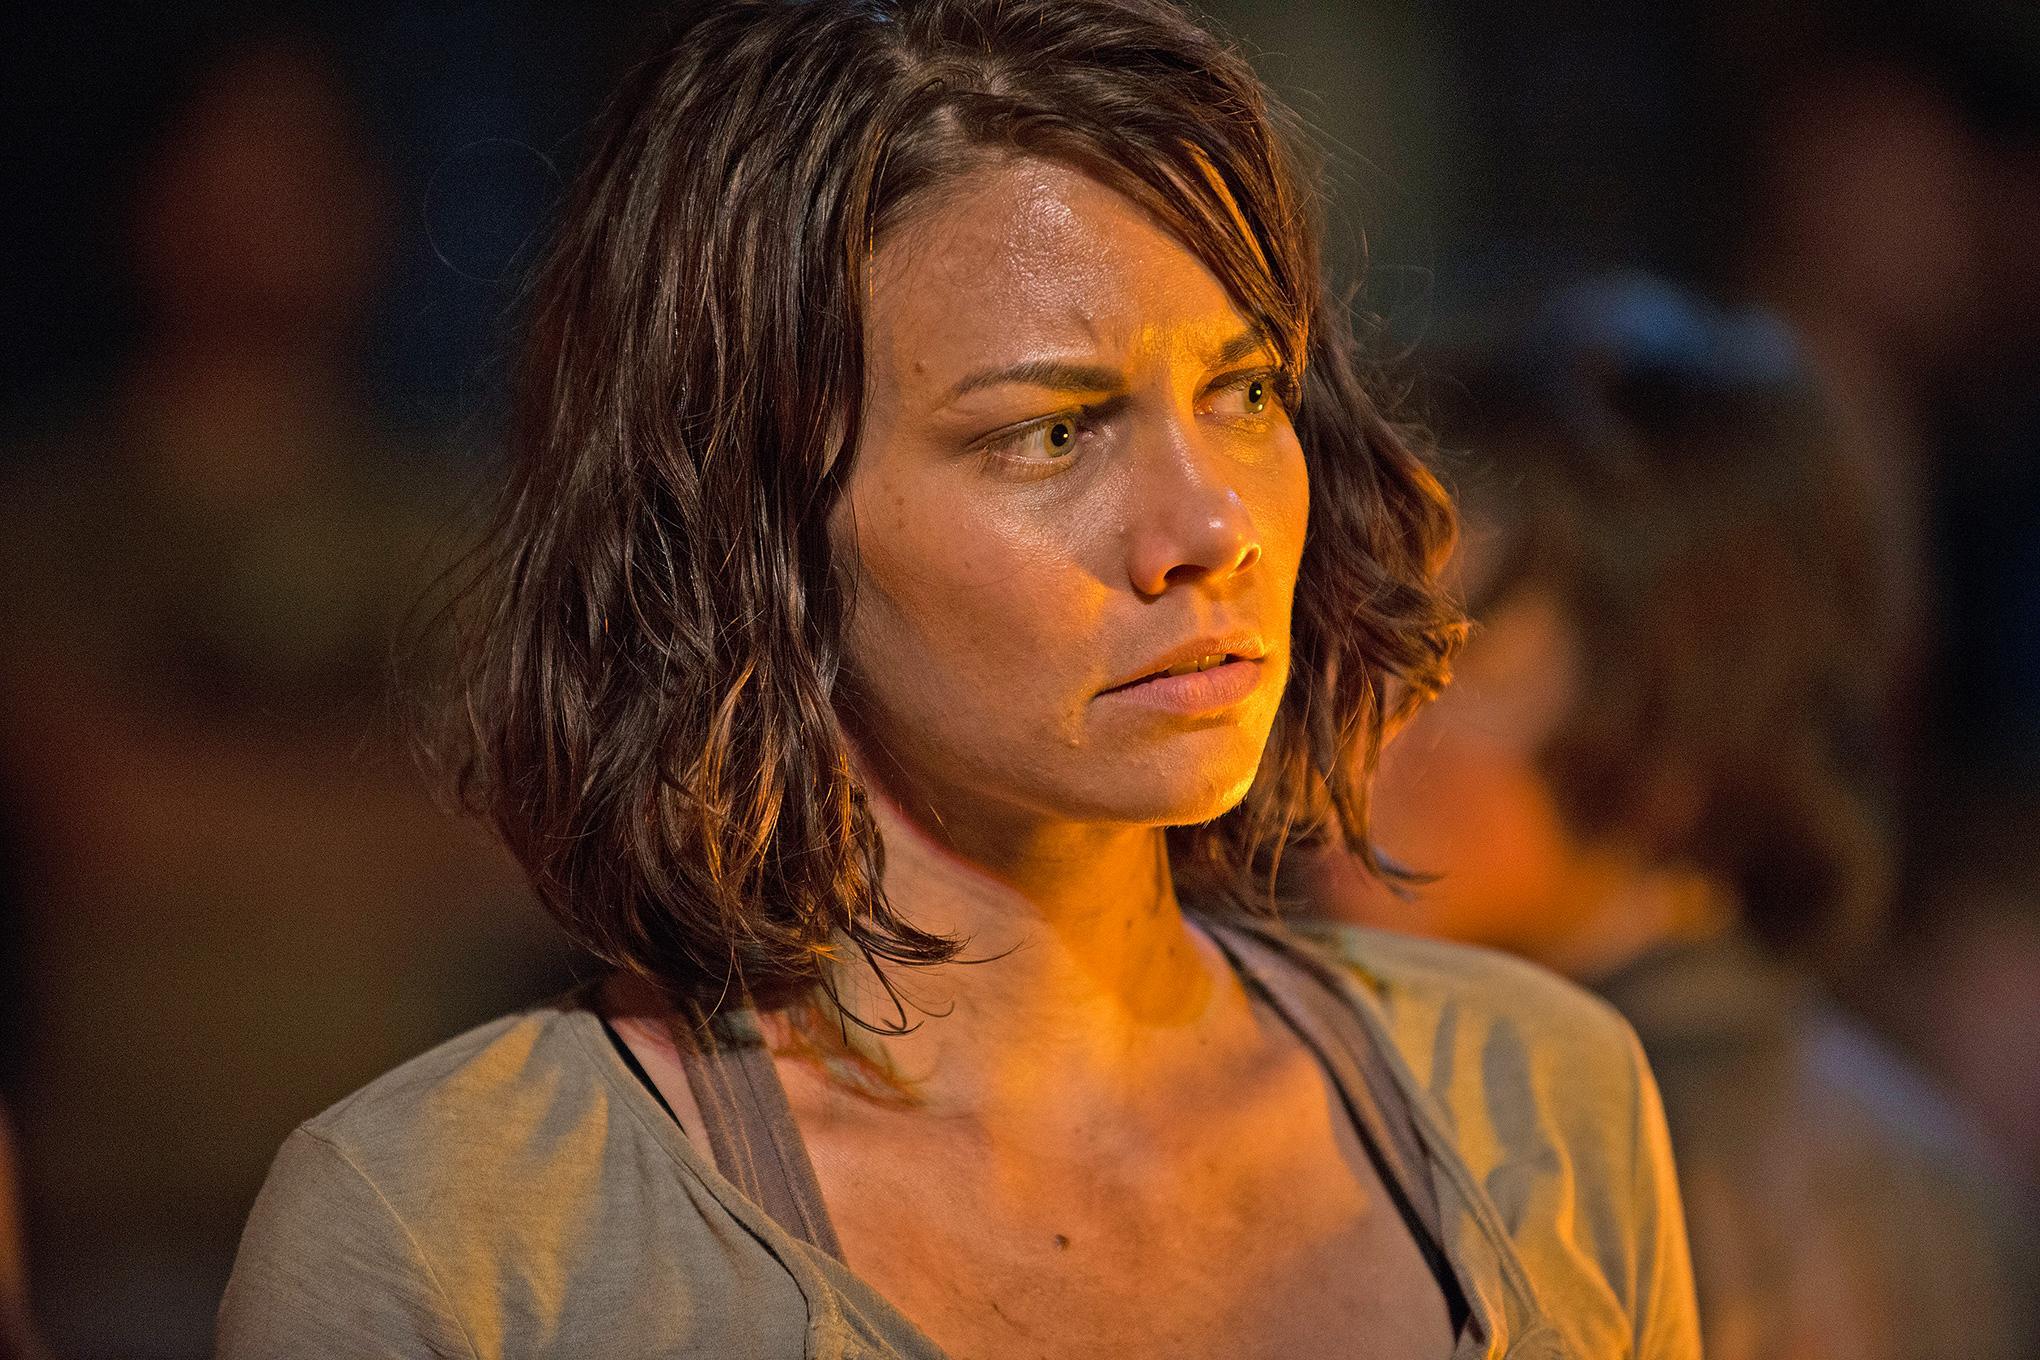 The Walking Deads Lauren Cohan Id Rather Have The Validation Of 8765